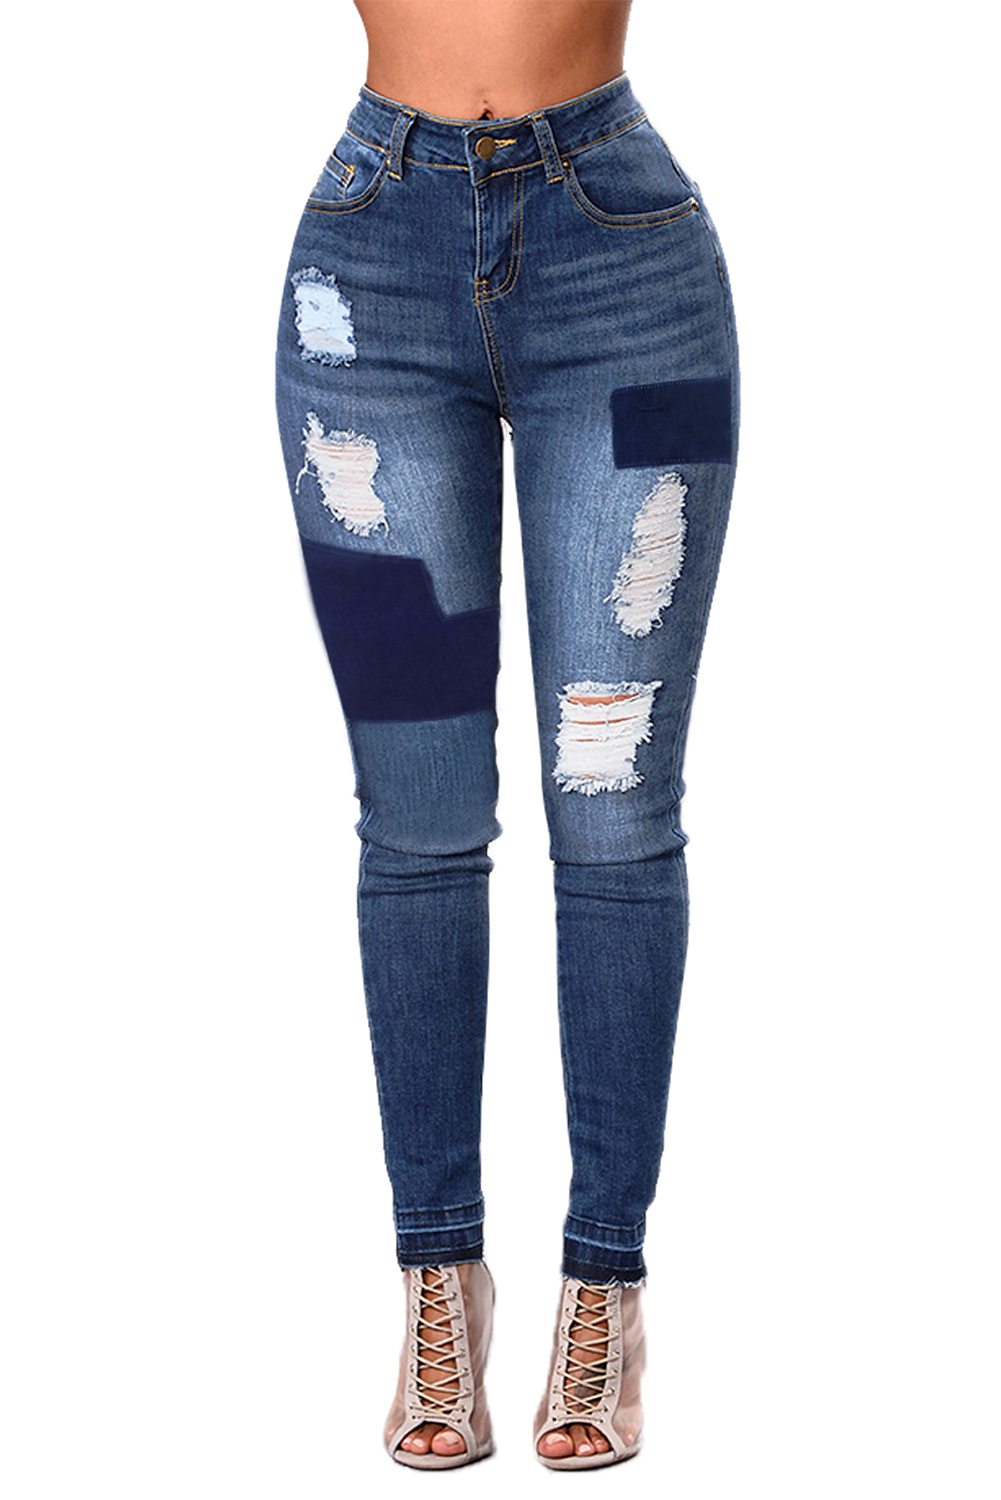 Blue Individual Patched Ripped Jeans for Ladies